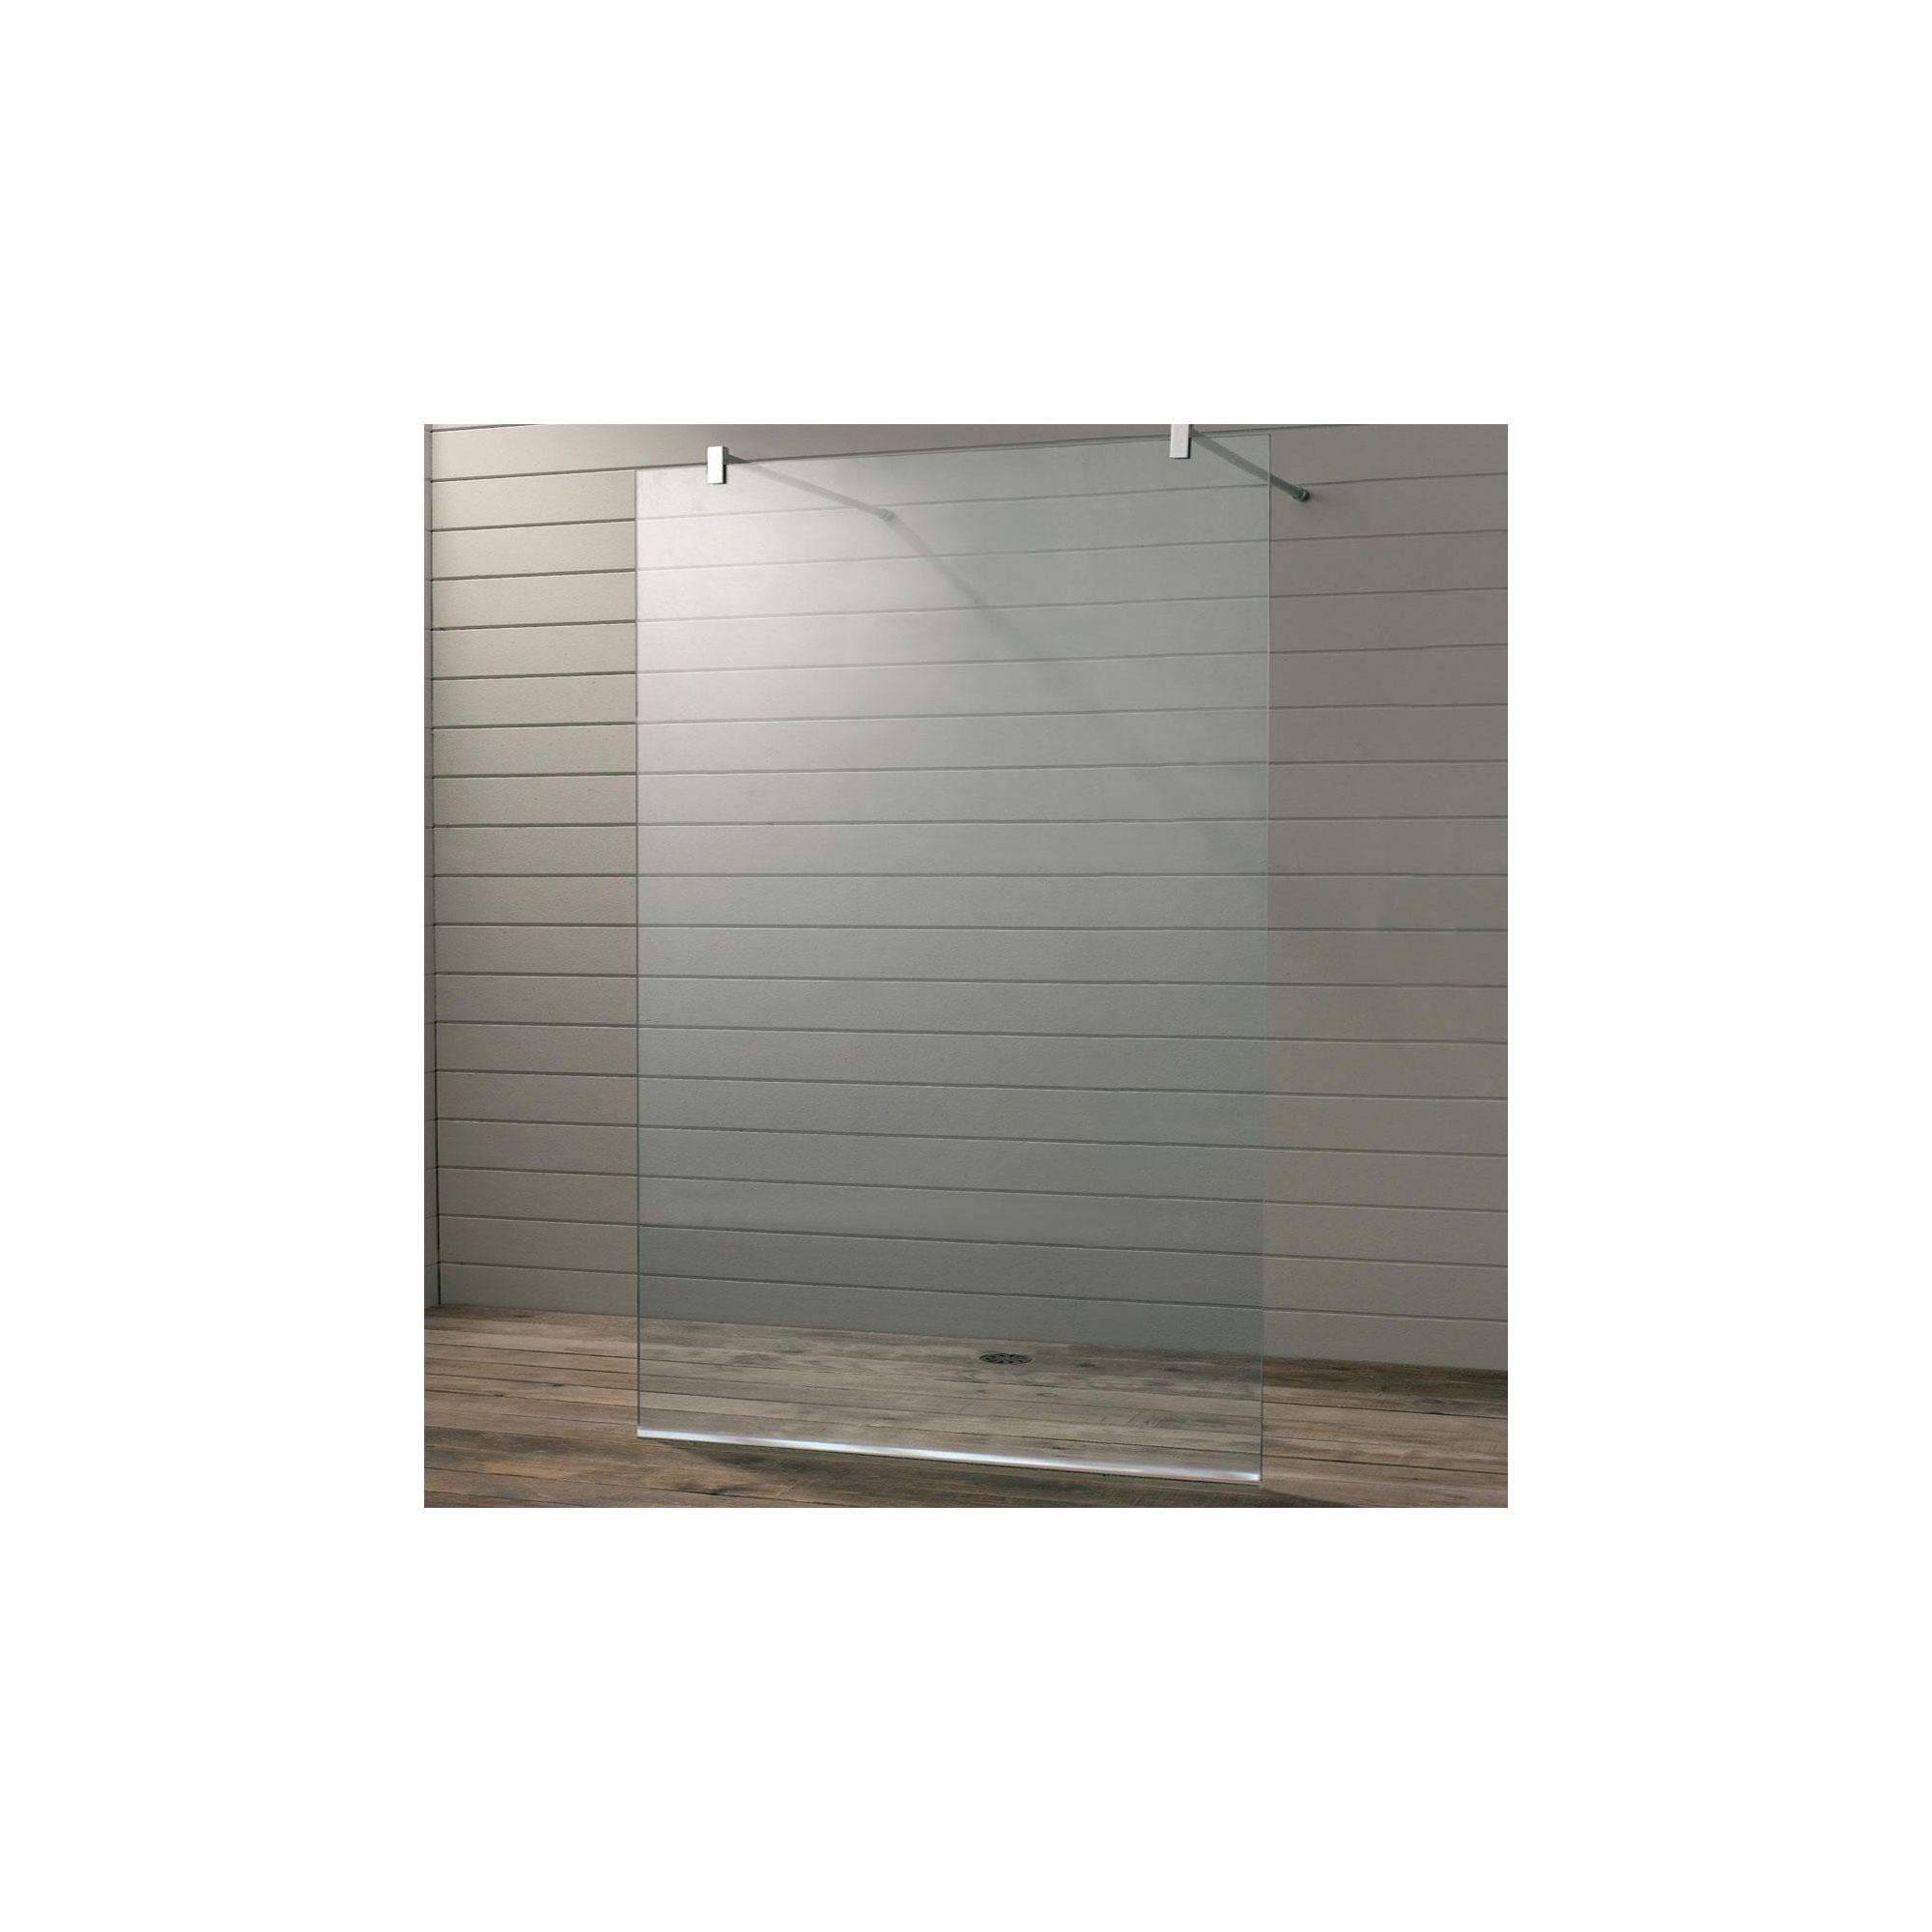 Duchy Premium Wet Room Glass Shower Panel, 1400mm x 760mm, 10mm Glass, Low Profile Tray at Tesco Direct